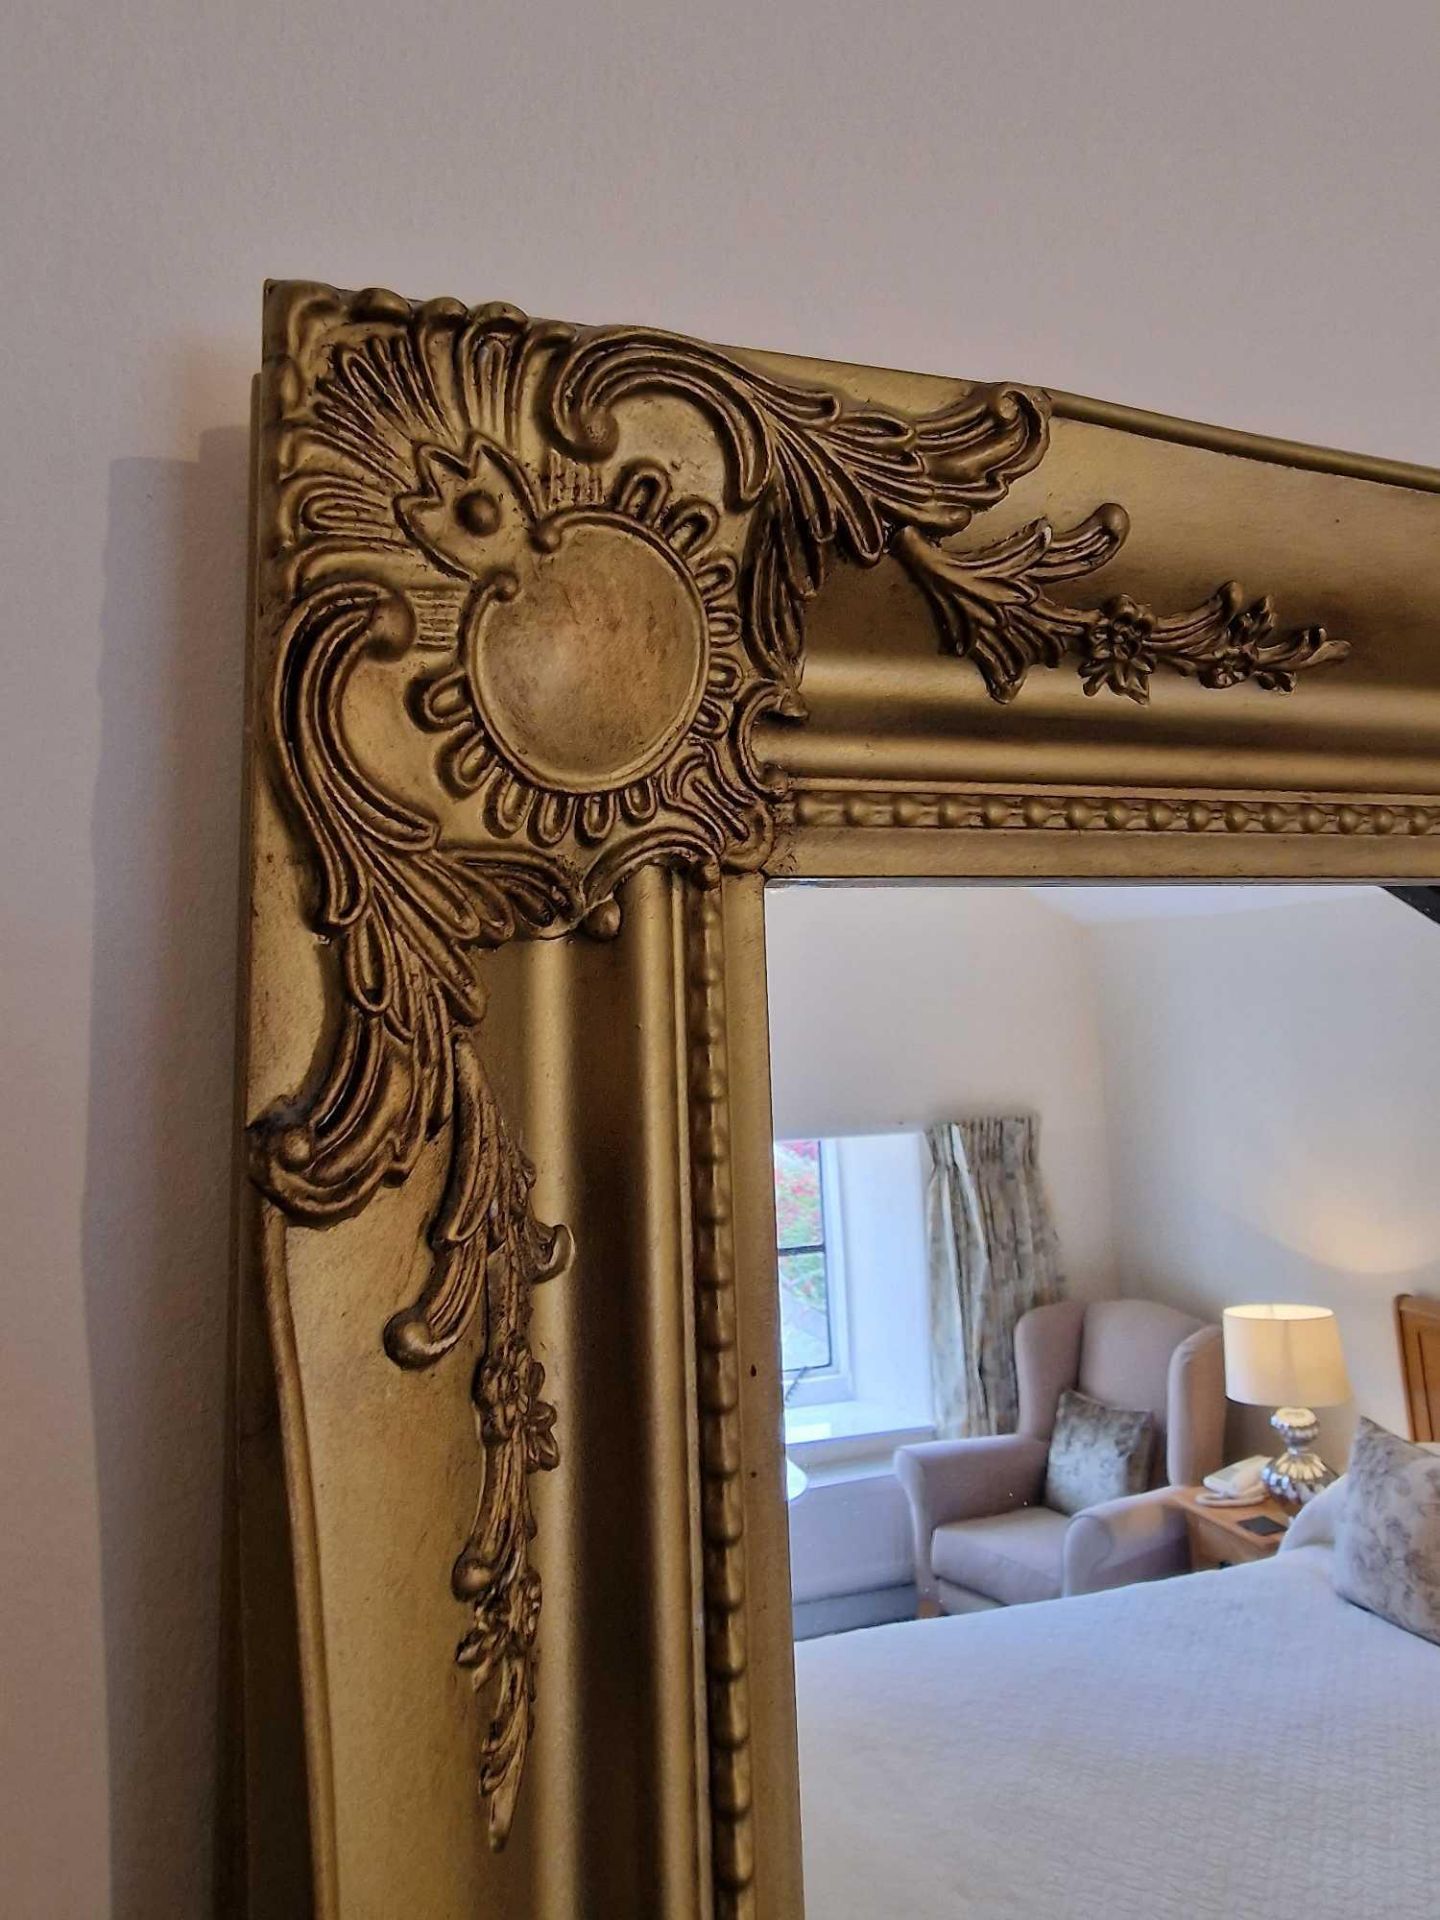 Large Mirror Gilded Stuccoed Wood Frame With Beading And Rosettes In The Corners Straight Mirror - Bild 2 aus 2